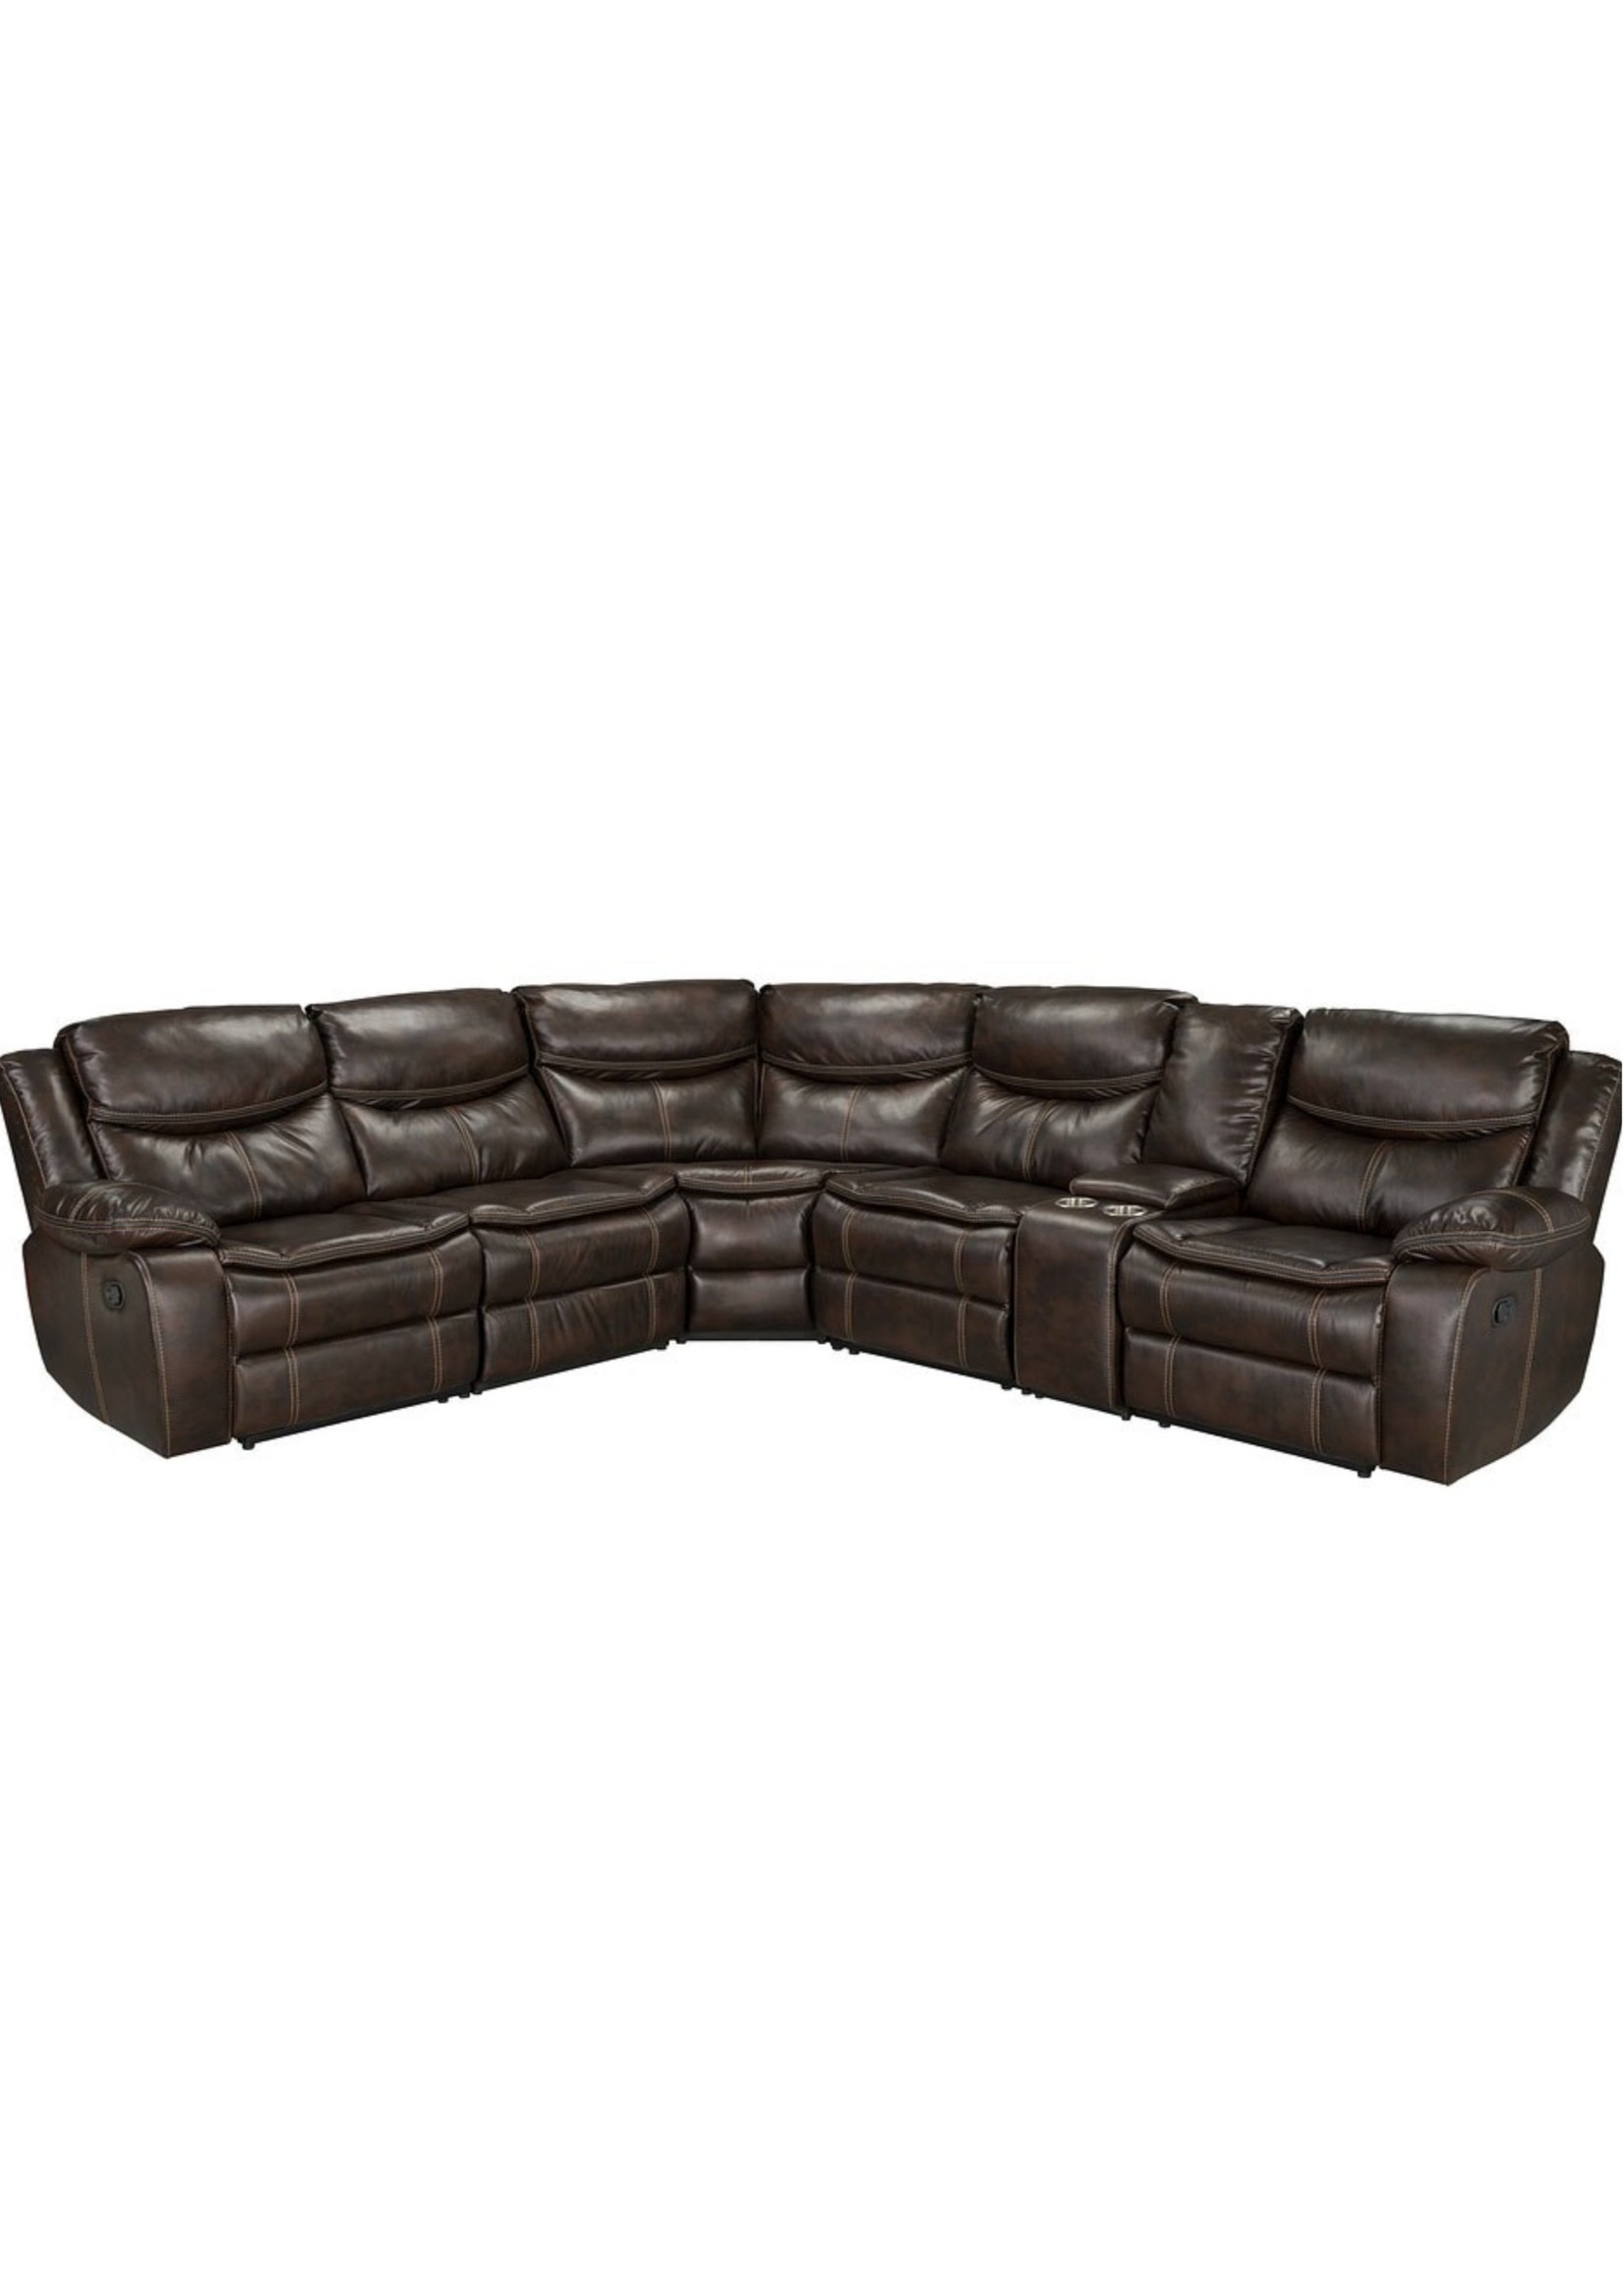 4253 HOLLINGSWORTH MOTION SECTIONAL